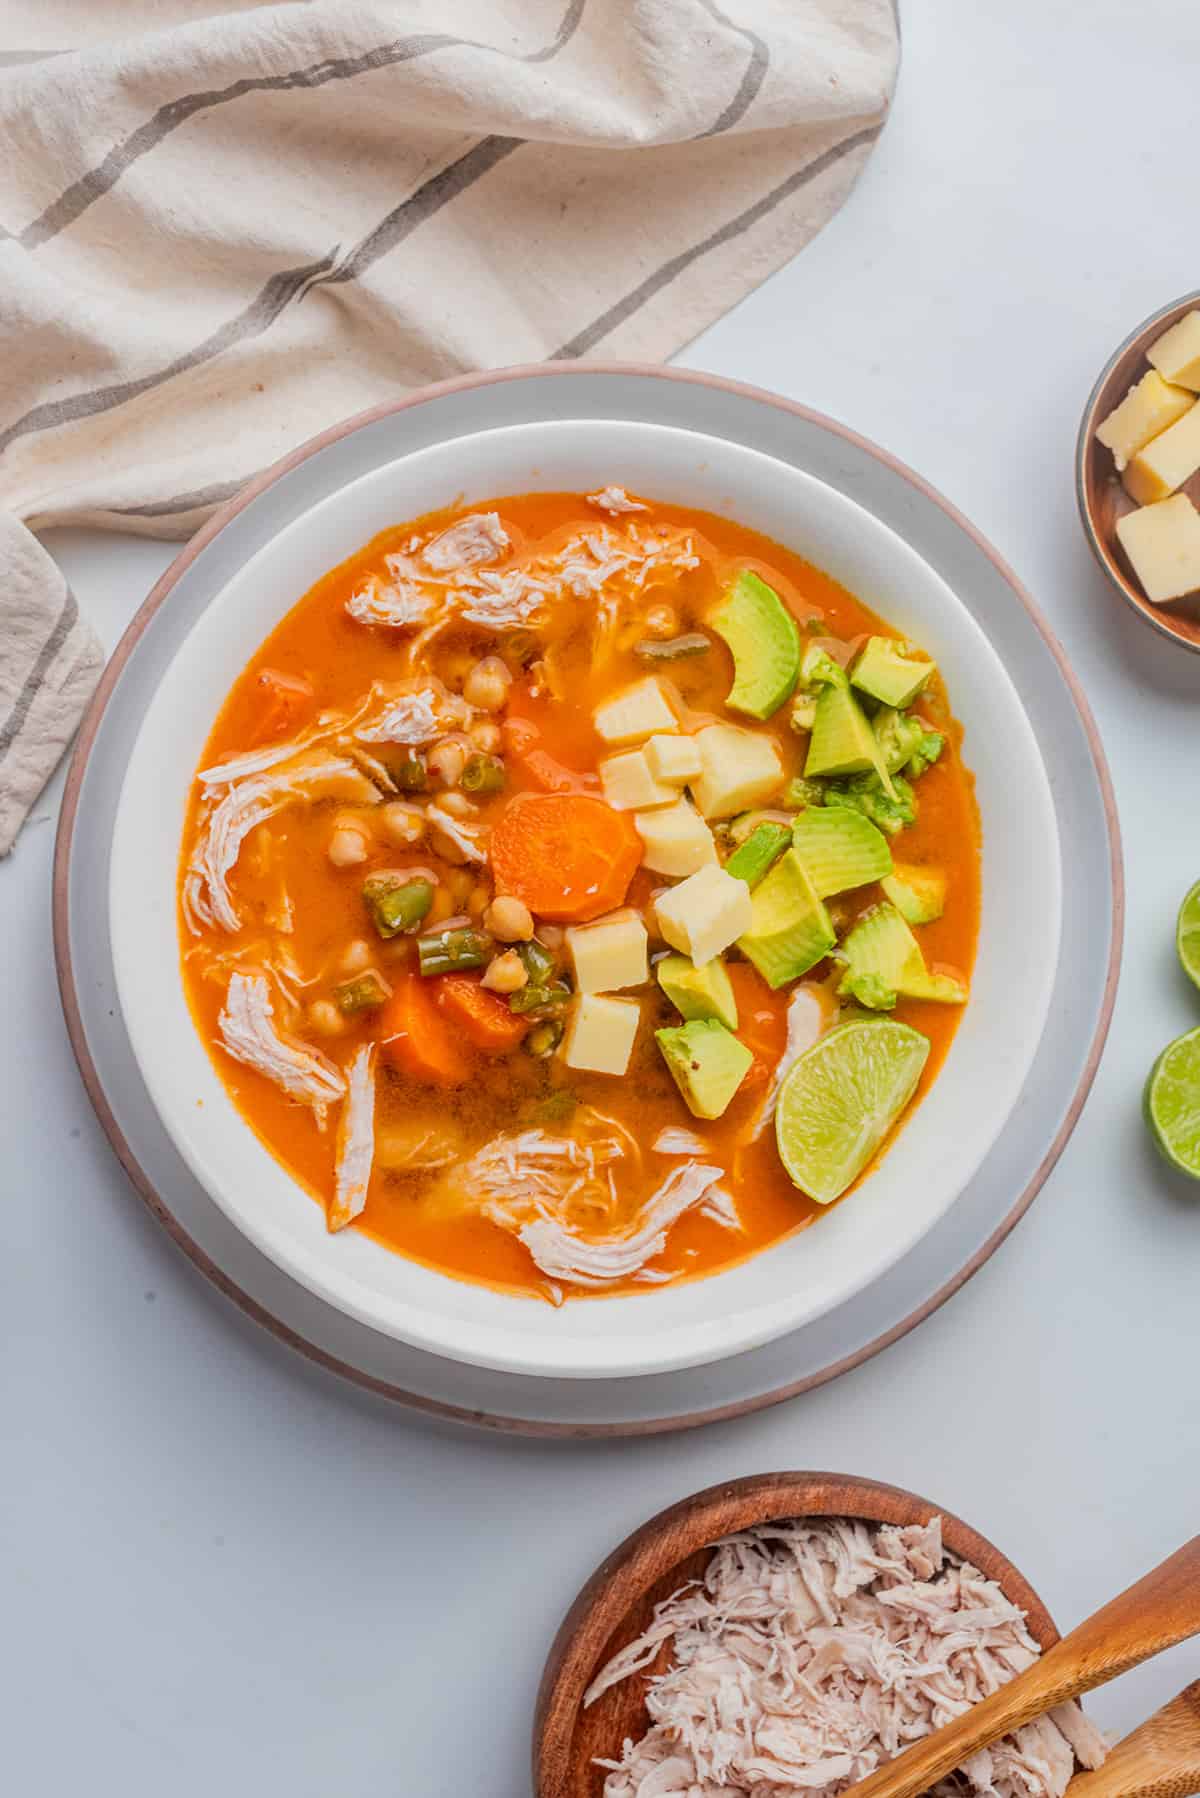 Caldo Tlalpeño served in a white bowl and topped with avocado and cheese cubes.